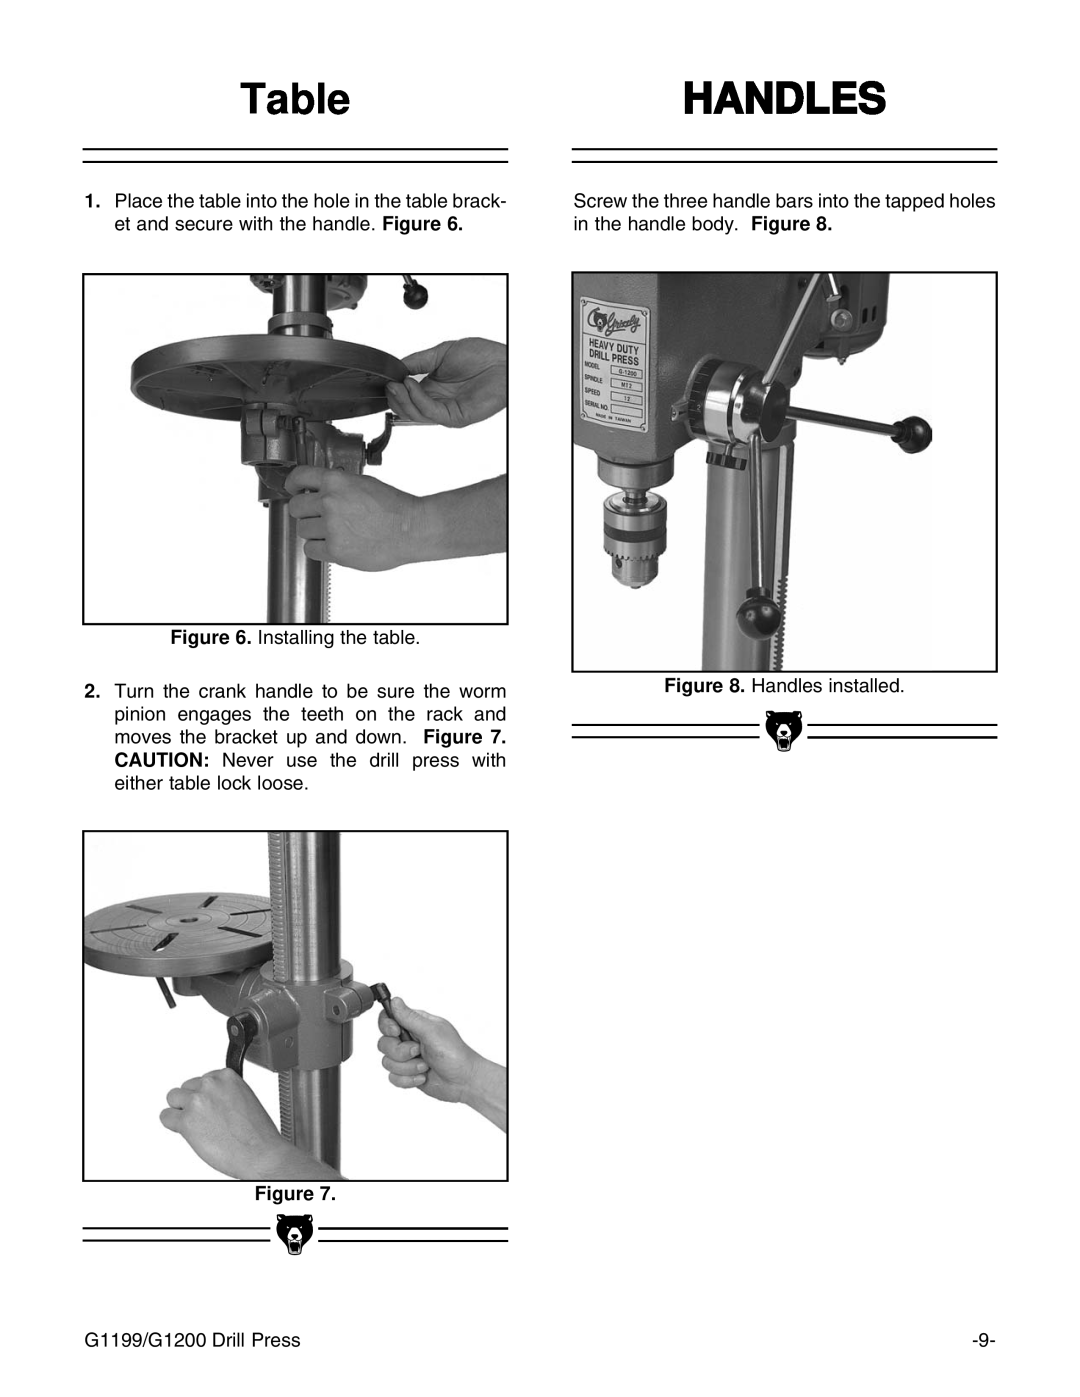 Grizzly G1200, G1199 instruction manual TableHANDLES 